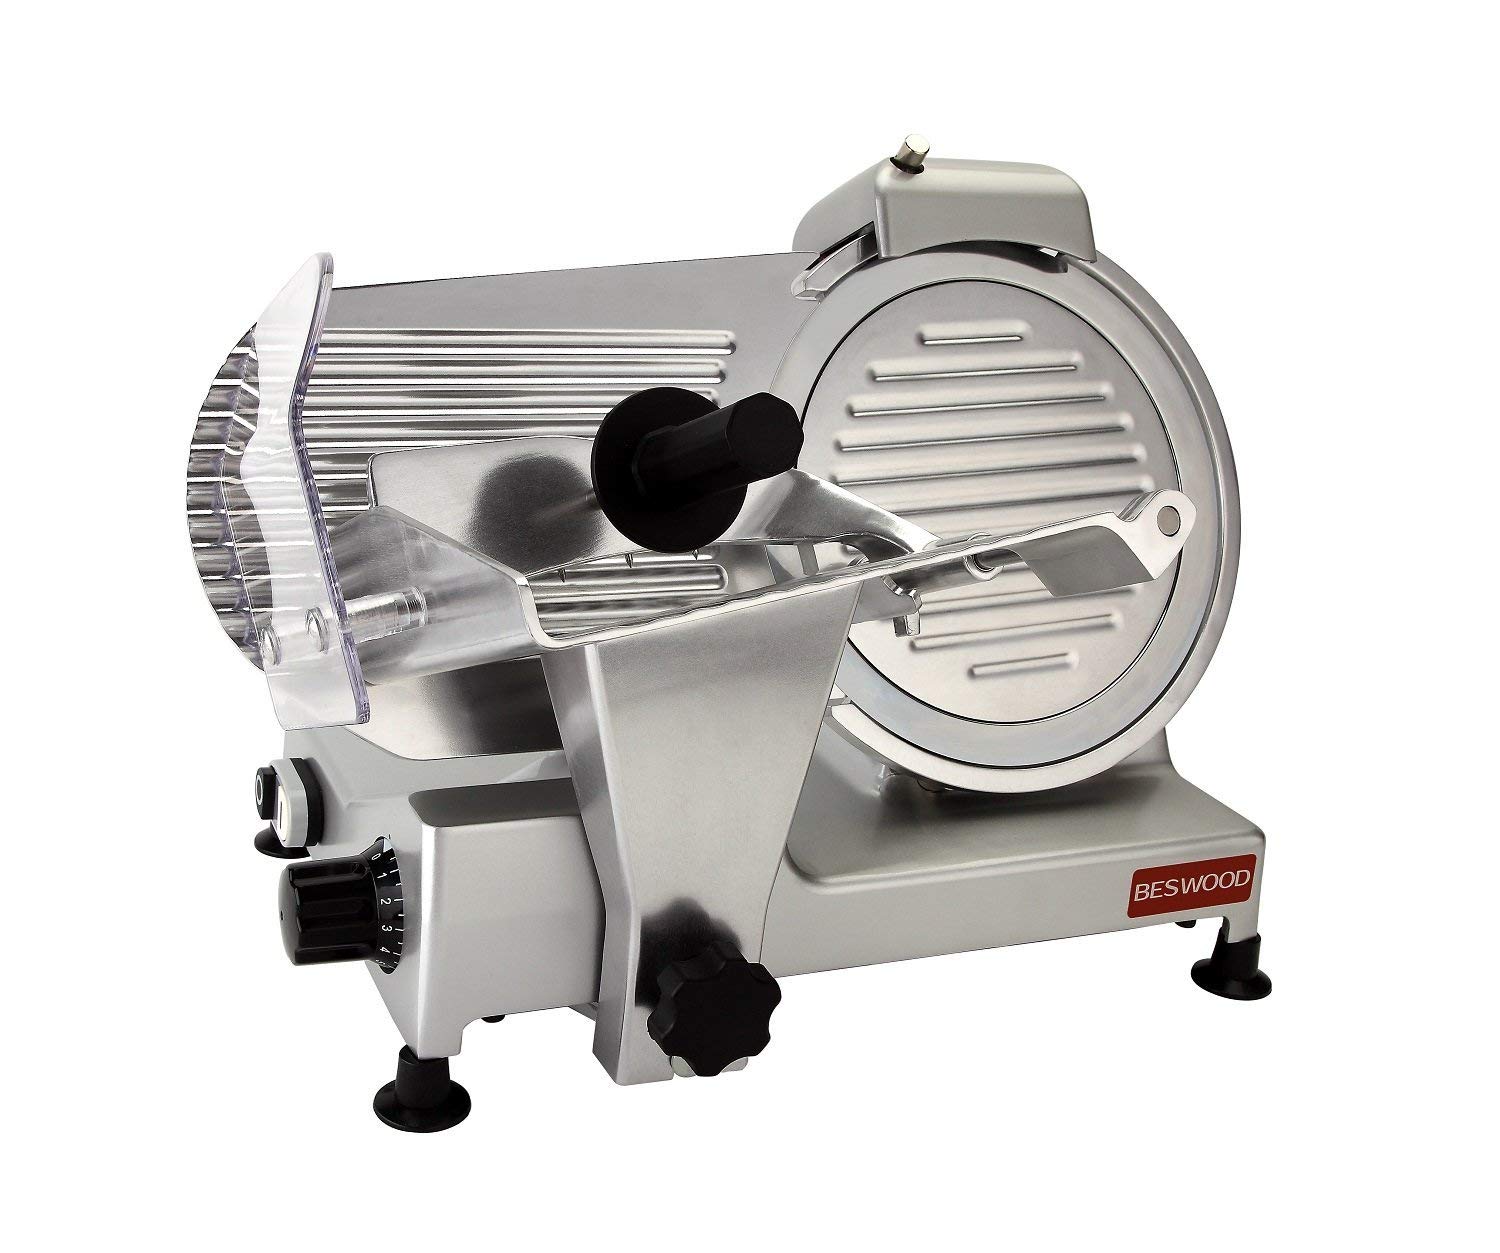 BESWOOD 10" Premium Chromium-plated Carbon Steel Blade Electric Deli Meat Cheese Food Slicer